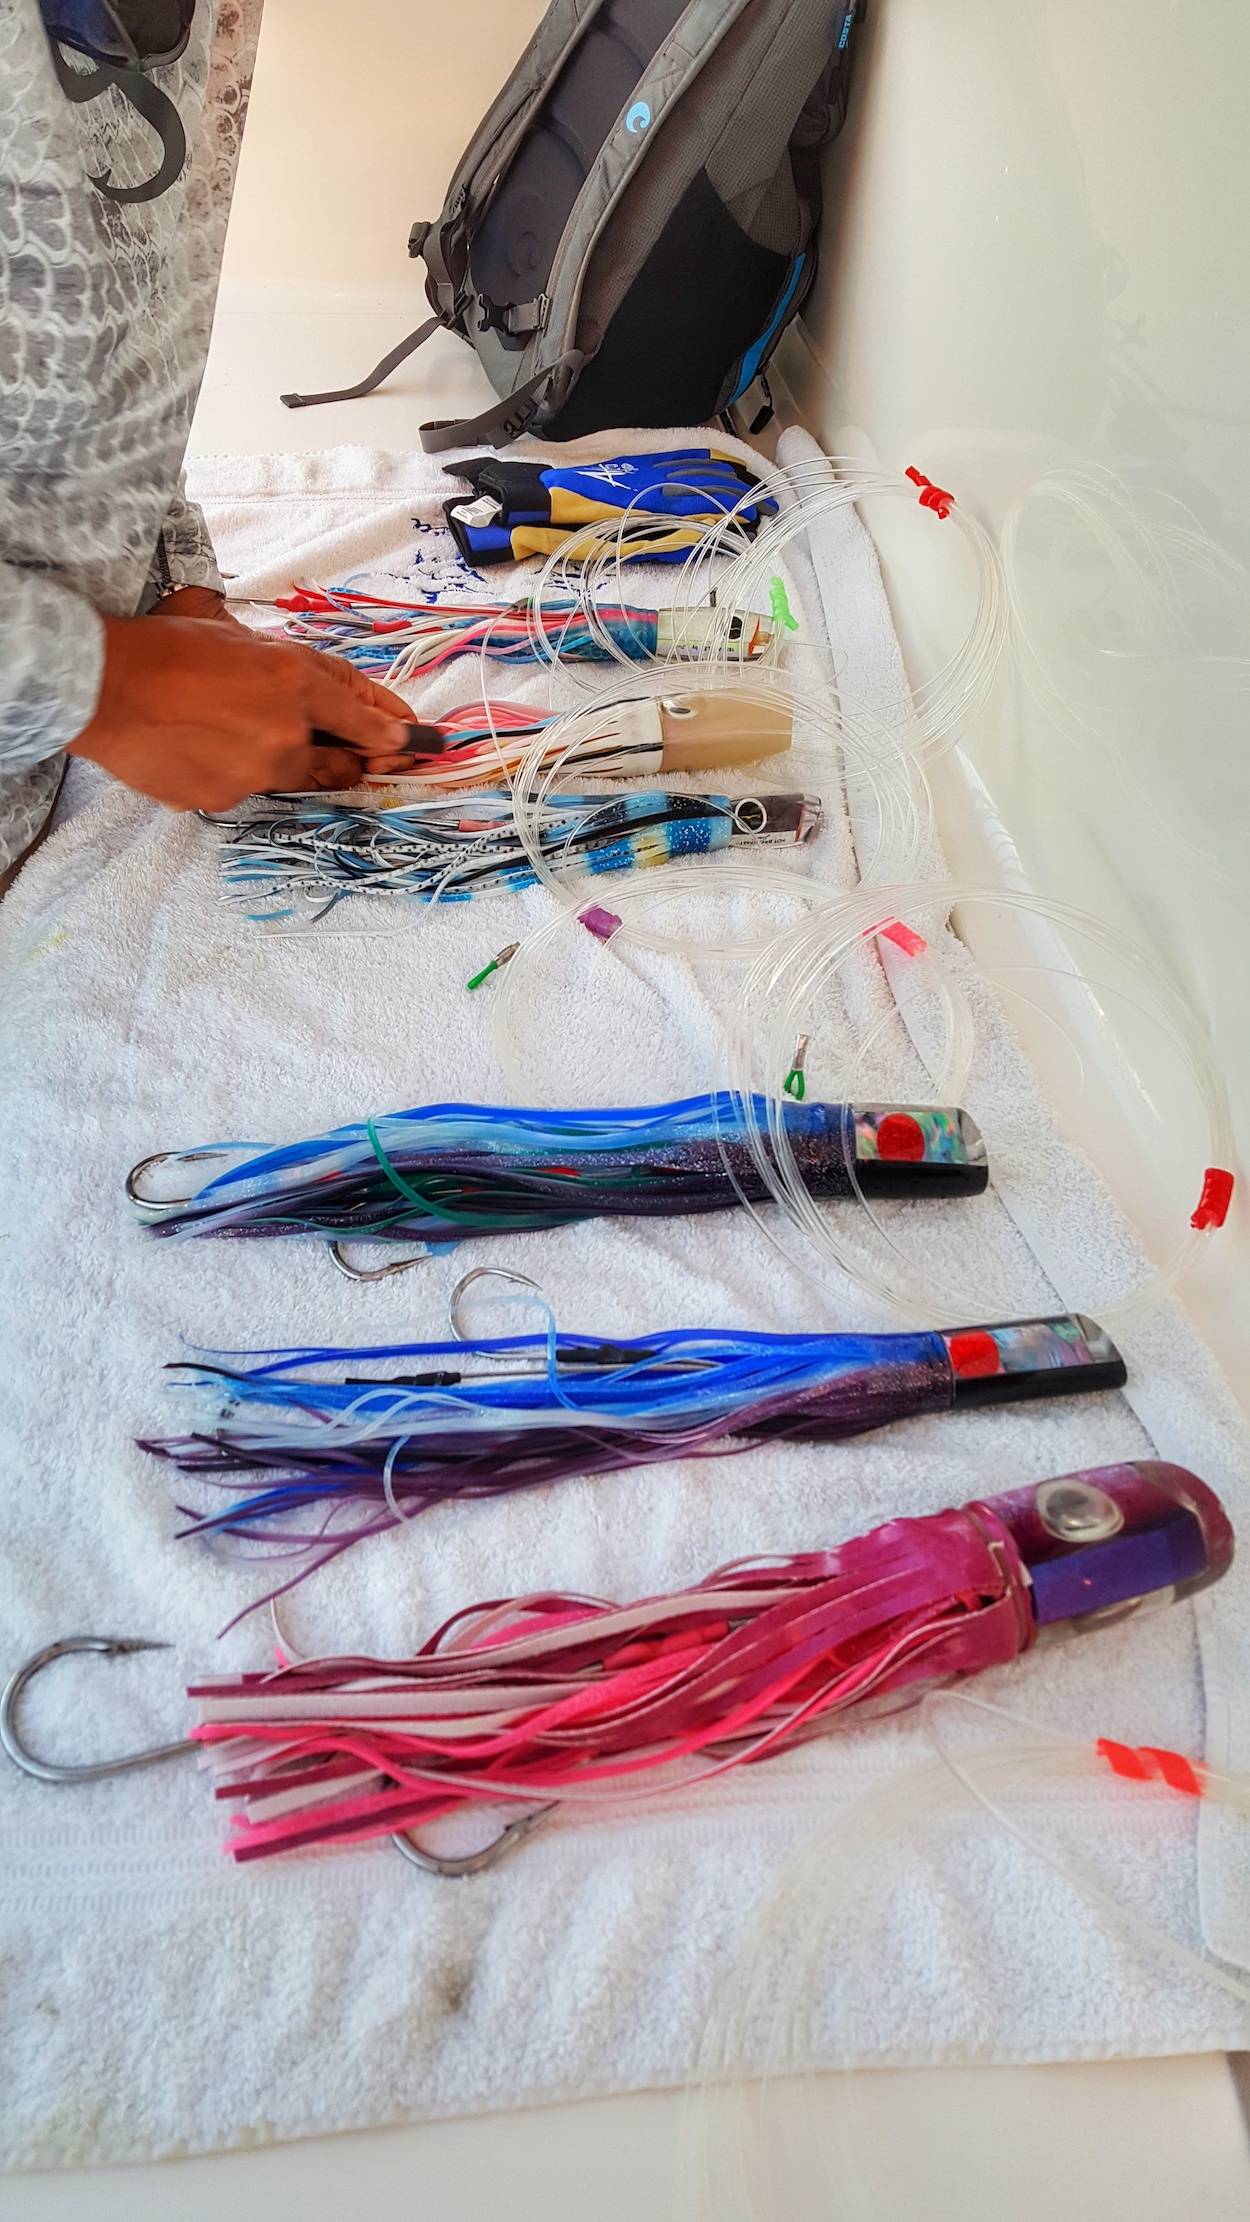 Rigging Trolling Lures - Skirted Baits